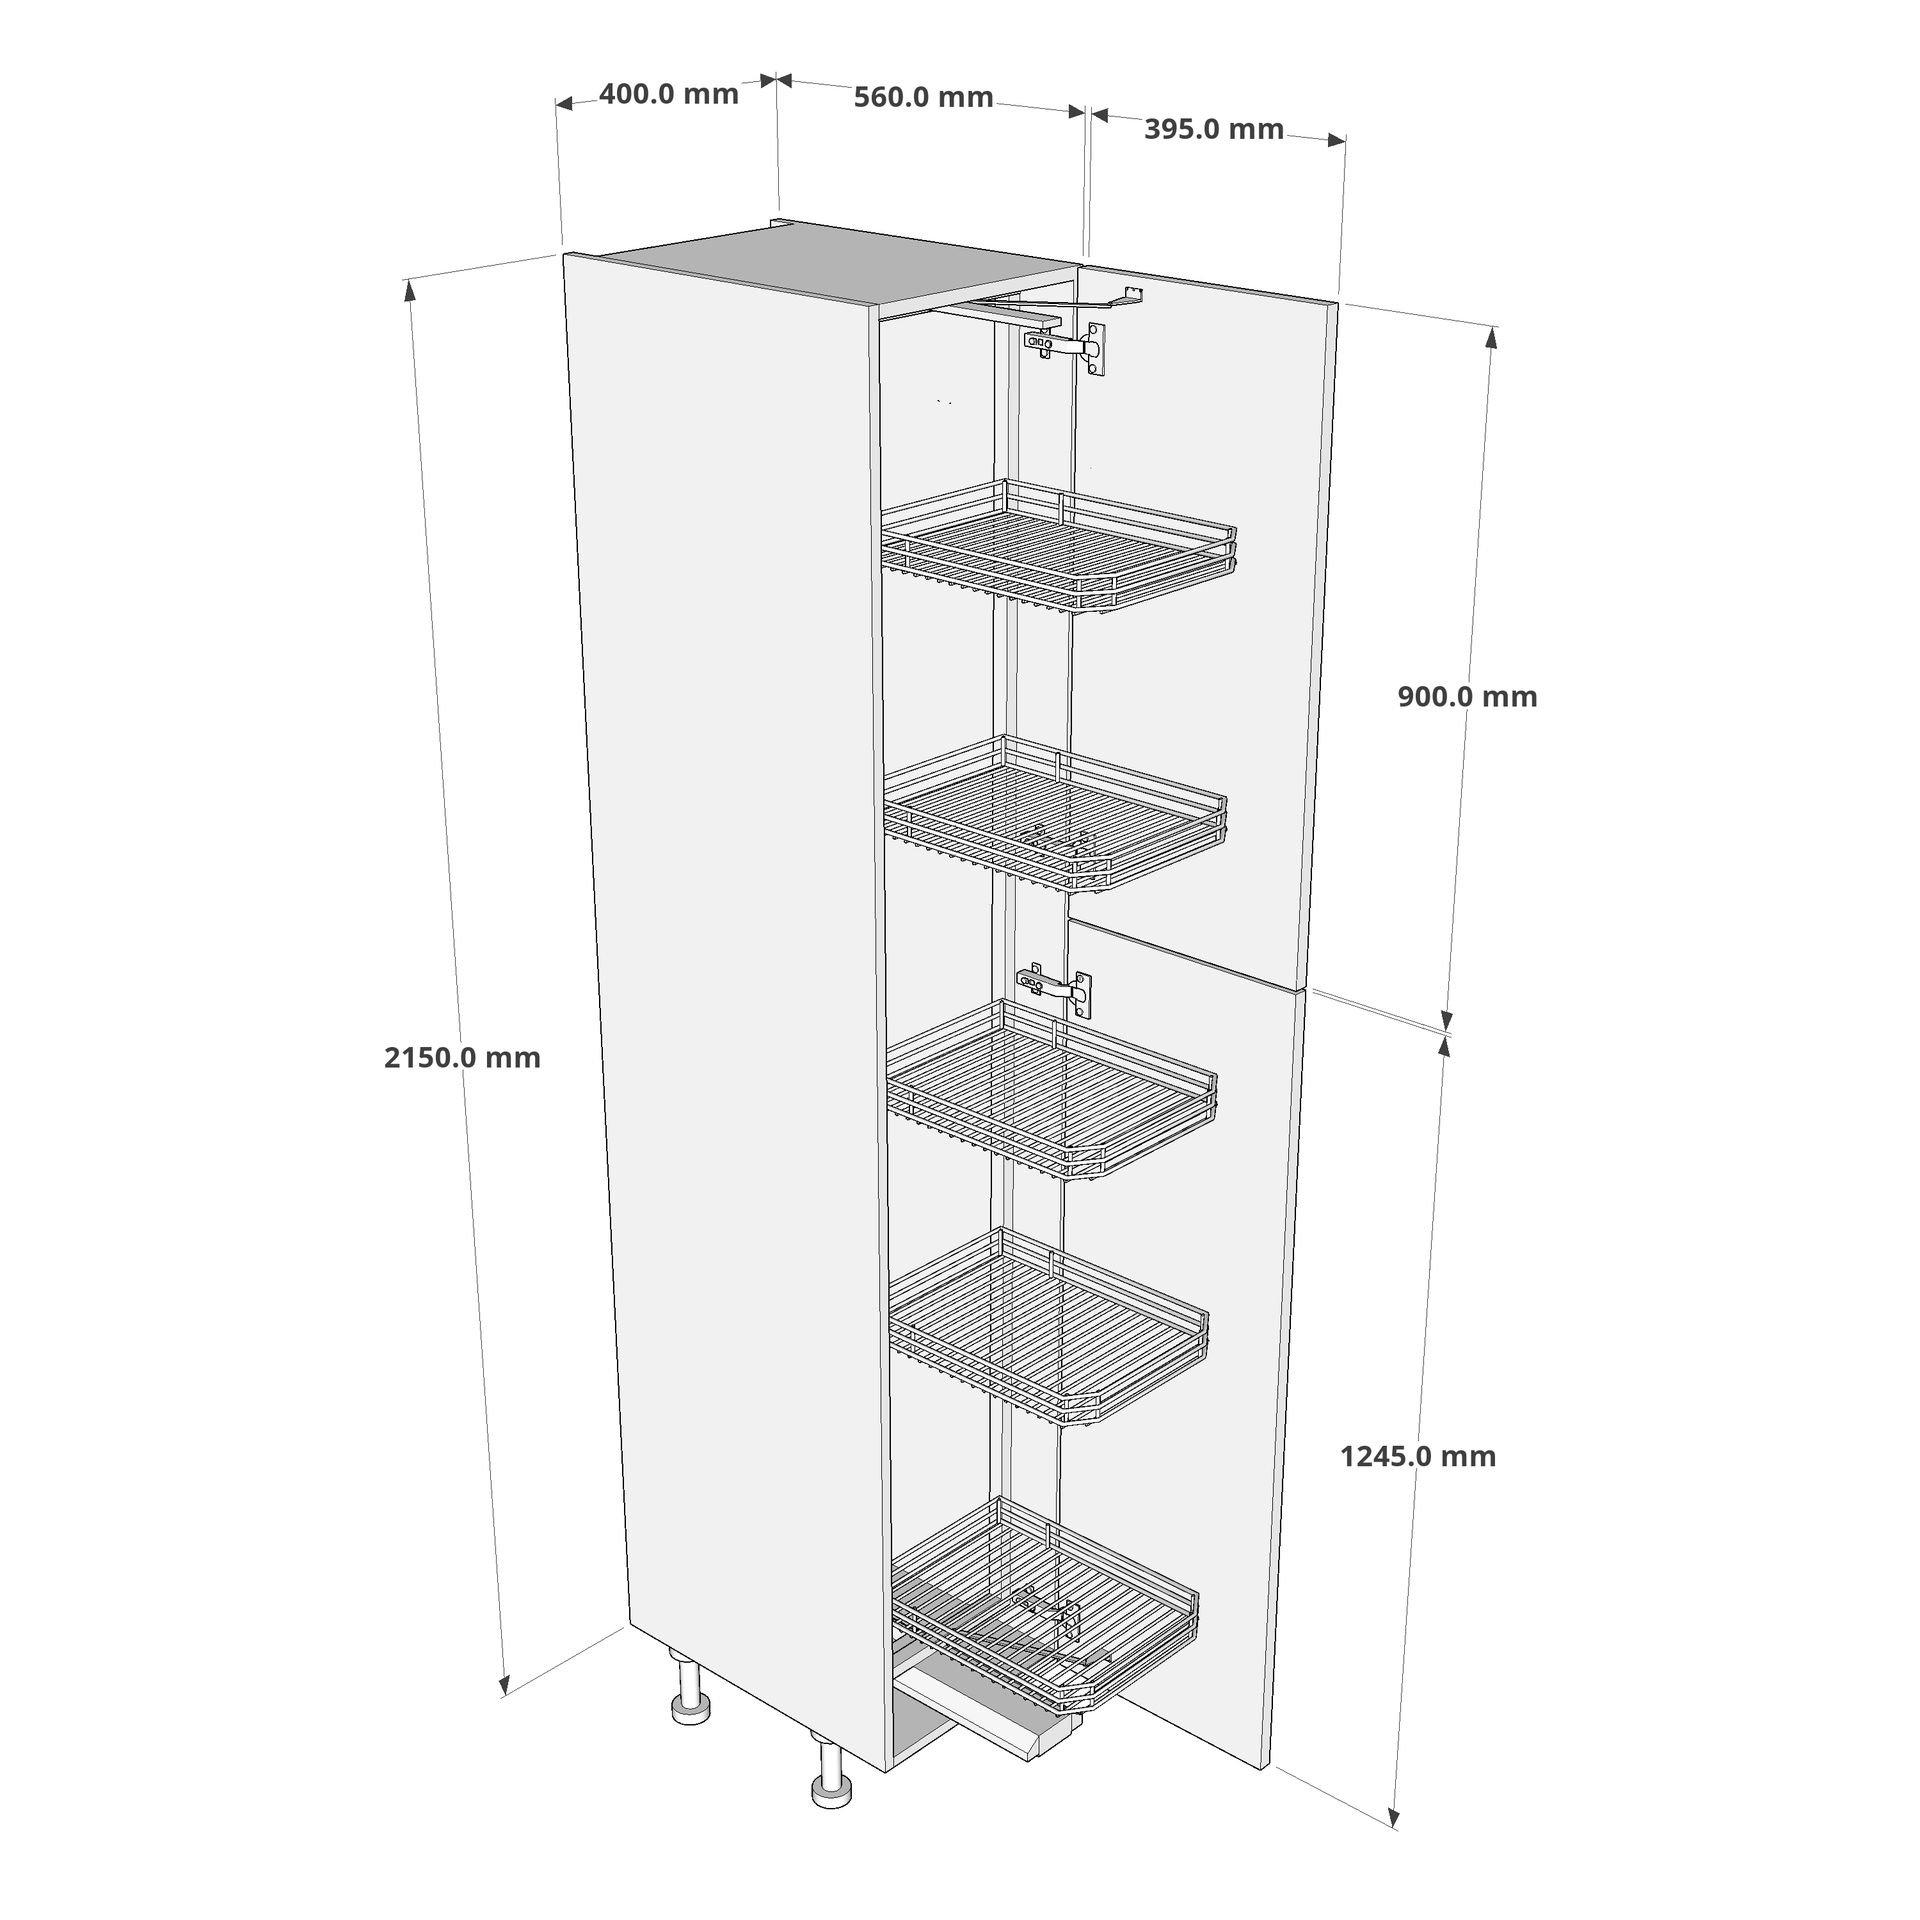 400mm Tall Swing Out Larder Unit - 895mm Top Door (High) Dimension